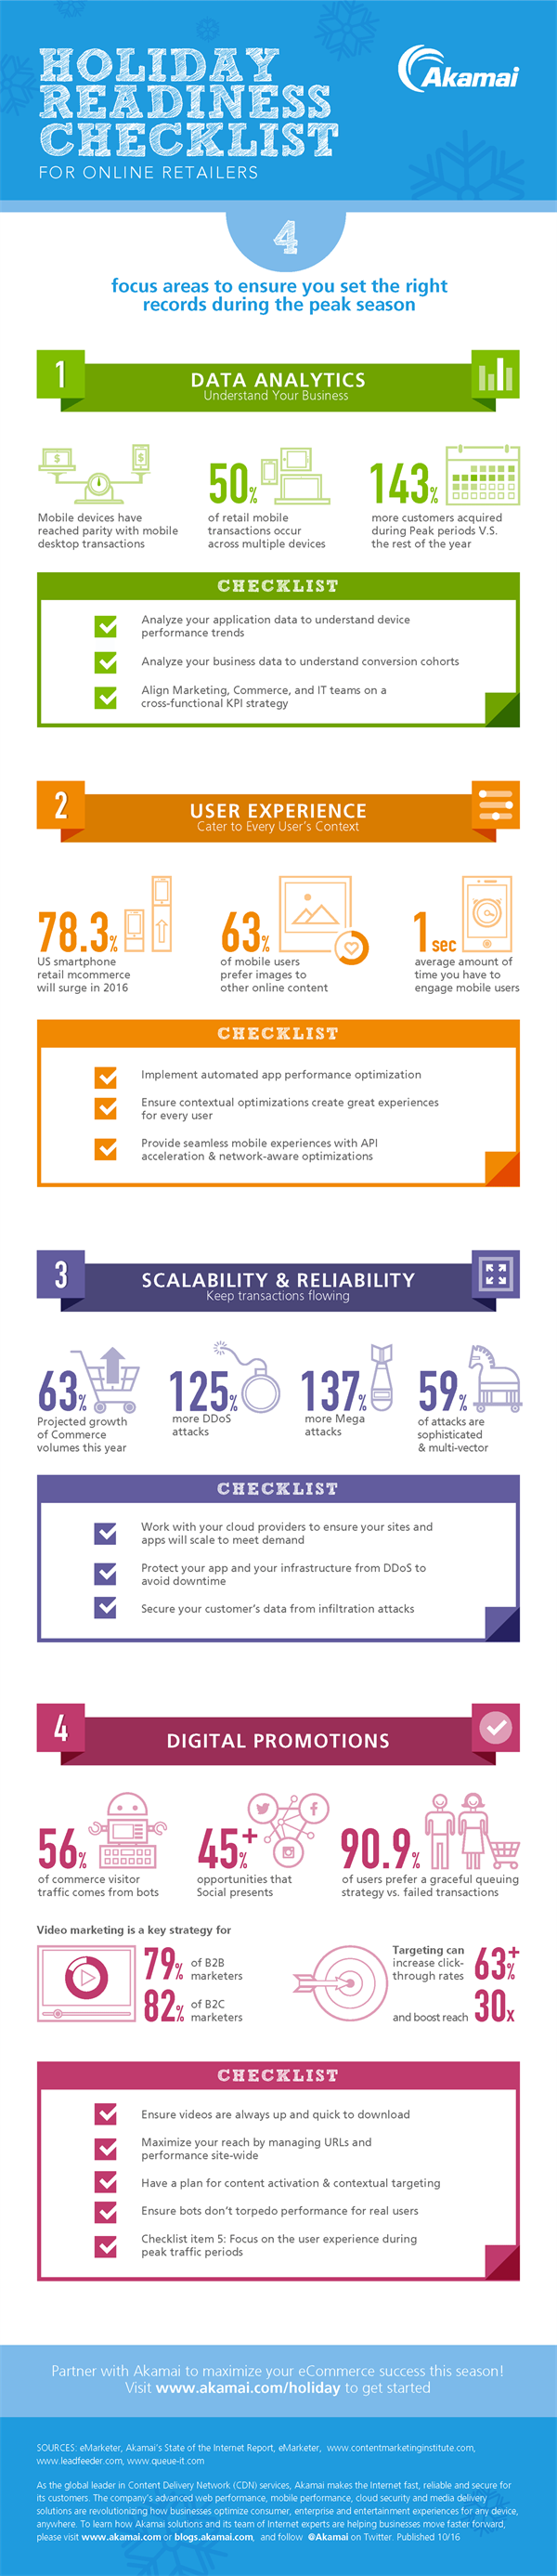 akamai-holiday-readiness-checklist-for-online-retailers-fact-sheet